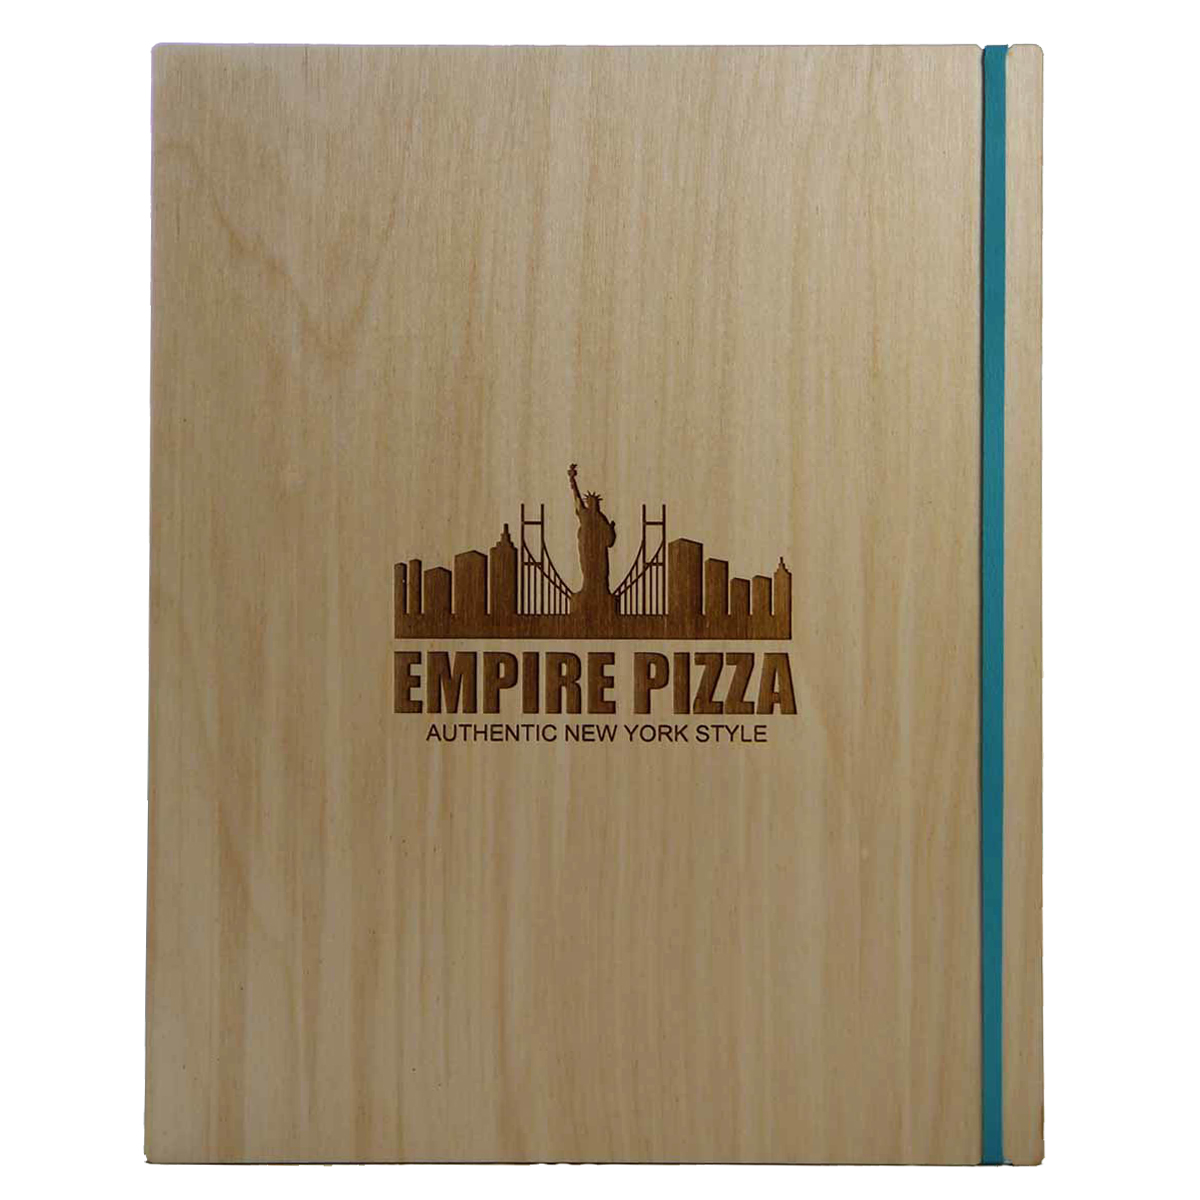 Baltic Birch Menu Board with Vertical Band 8.5x11 in natural finish with laser engraved logo.